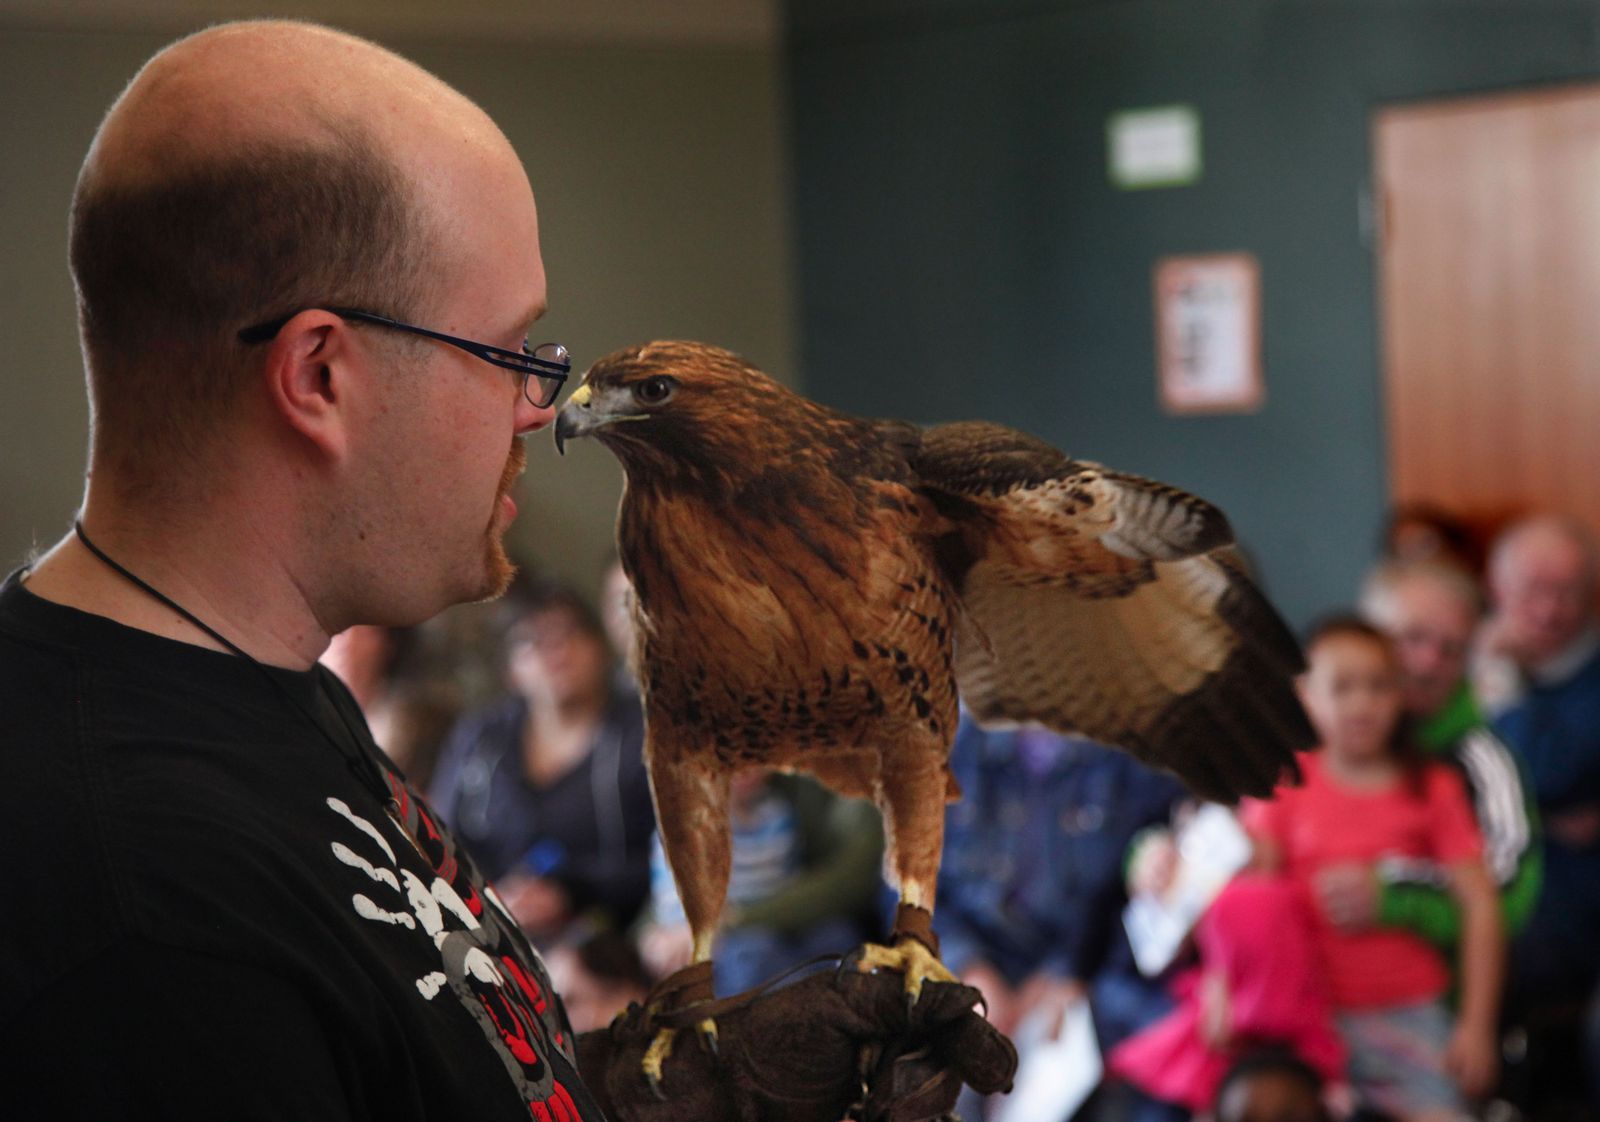 Dan Bates / The HeraldSarvey Wildlife Center volunteer Robert Lee holds a red-tailed hawk with only one wing Friday at the Snohomish Library. Having lost a wing, the hawk will remain at Sarvey for the rest of its life, Lee said.